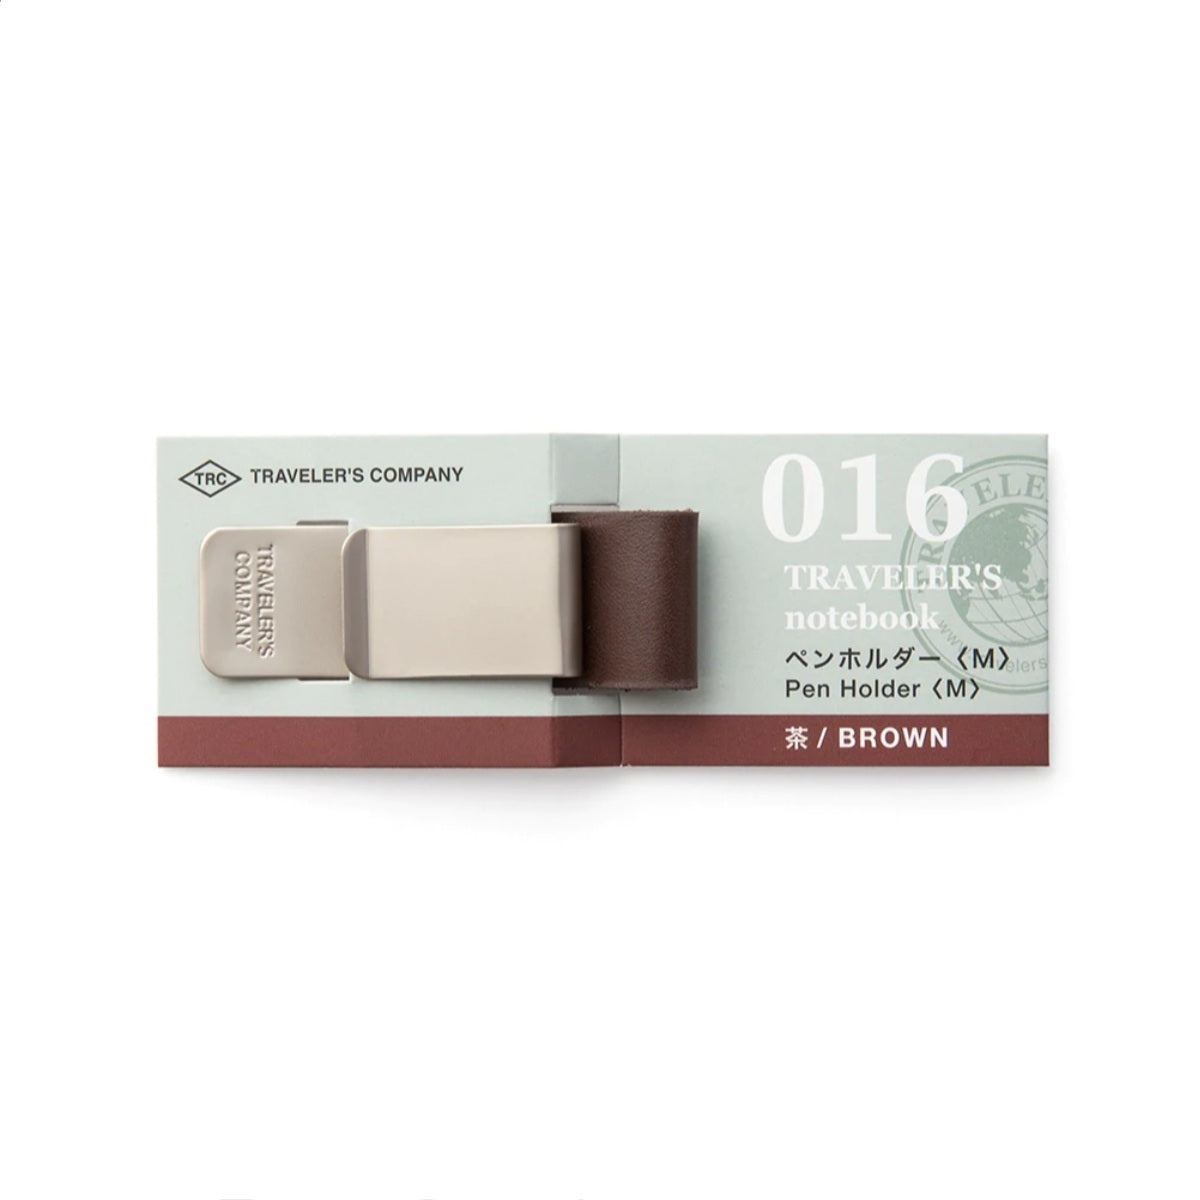 Accessory | 016 Pen Holder - BROWN #14299-006